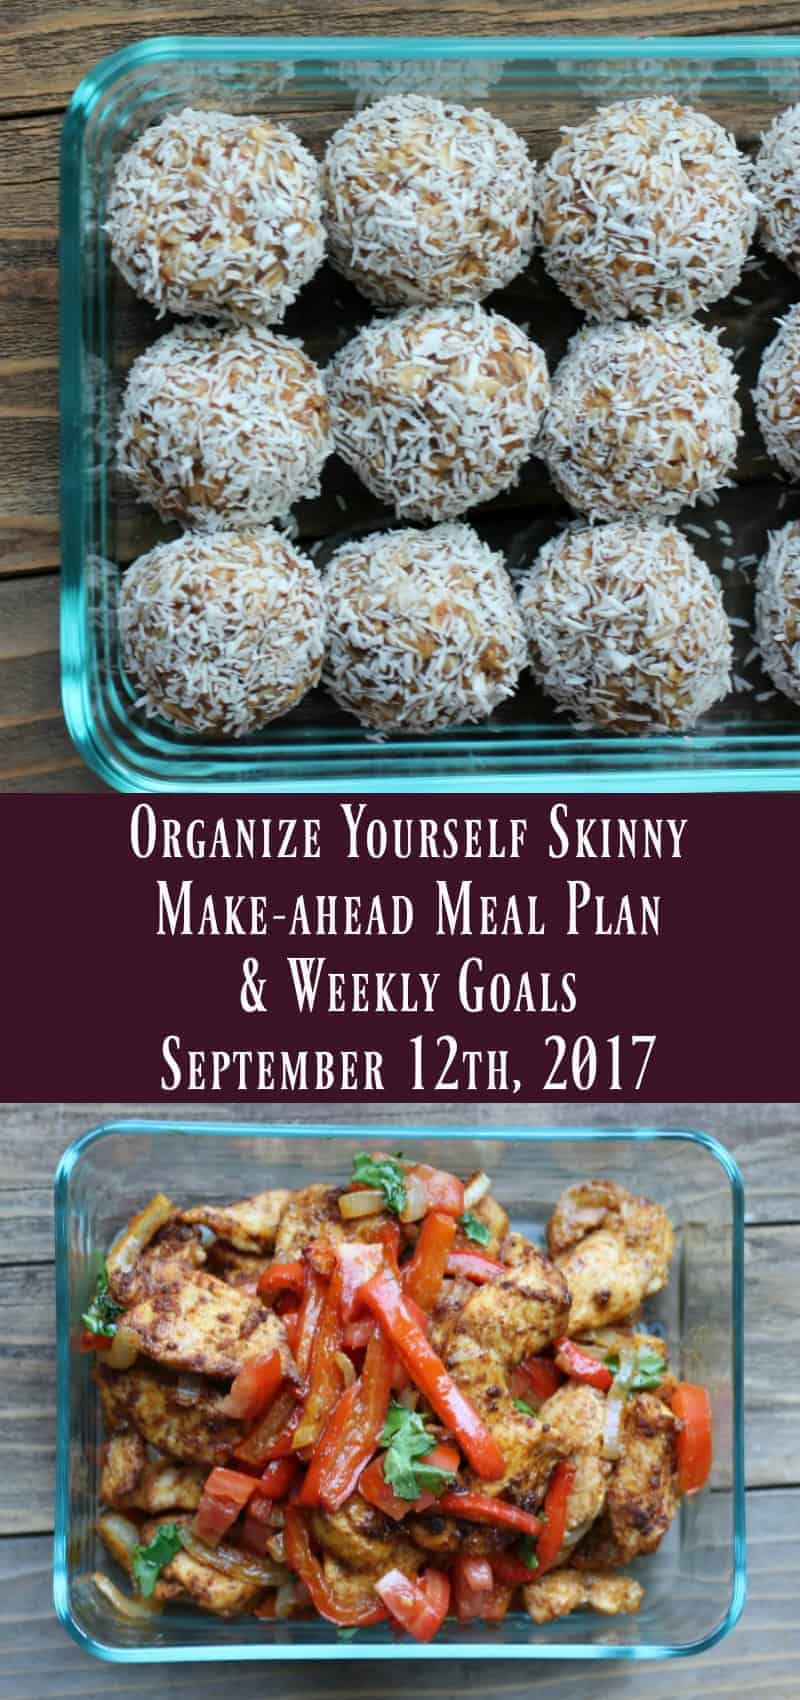 Make-ahead meal plan, weigh in, and weekly goals